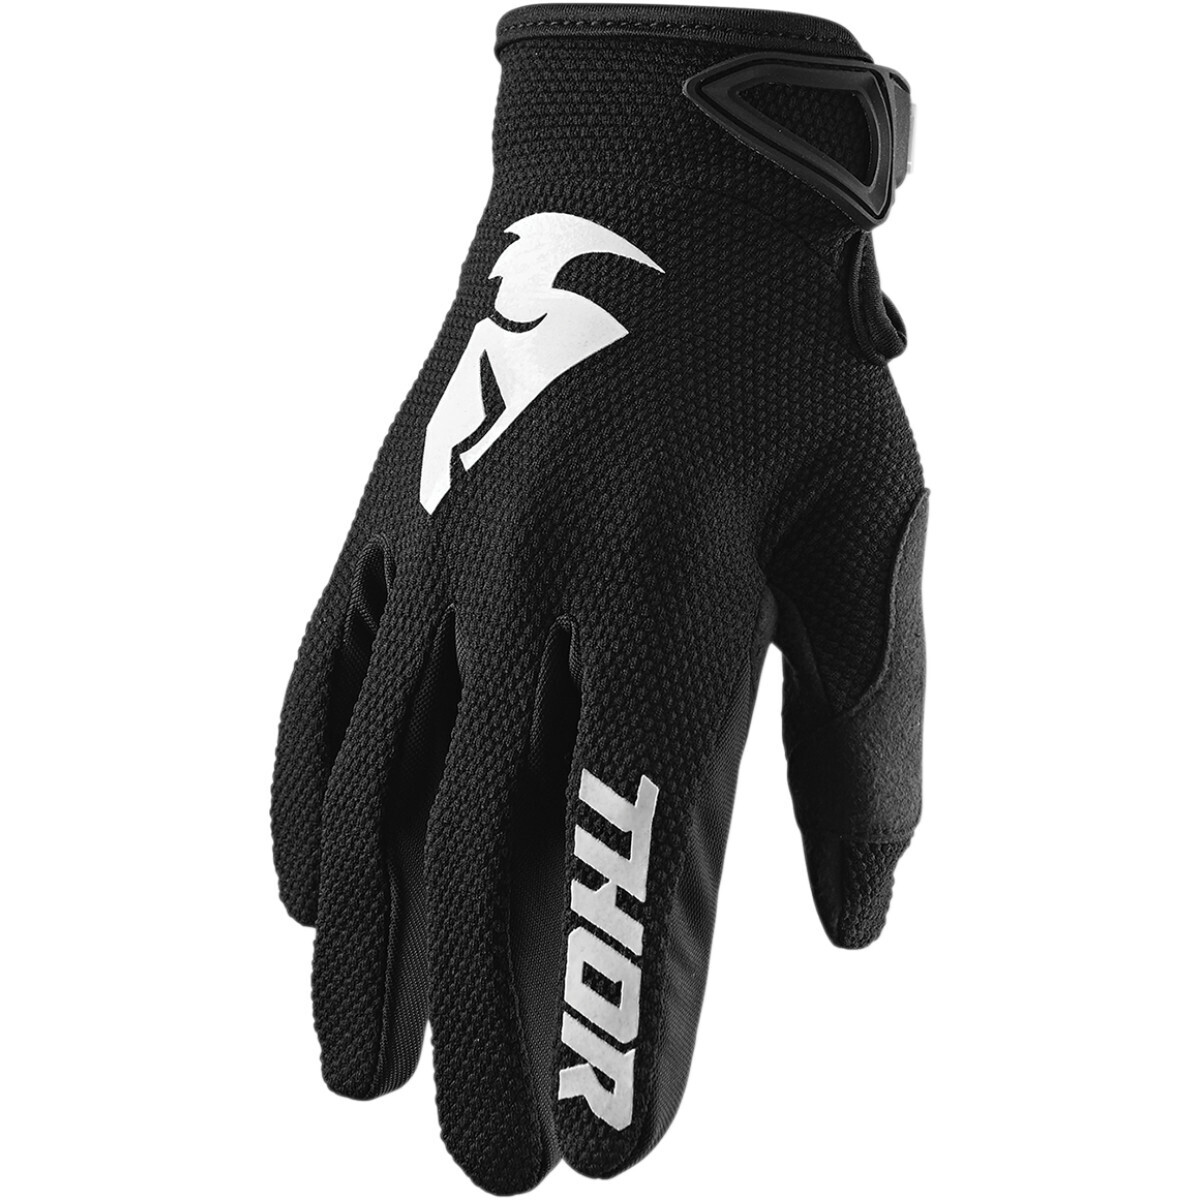 THOR
GLOVE S20Y SECTOR BLK